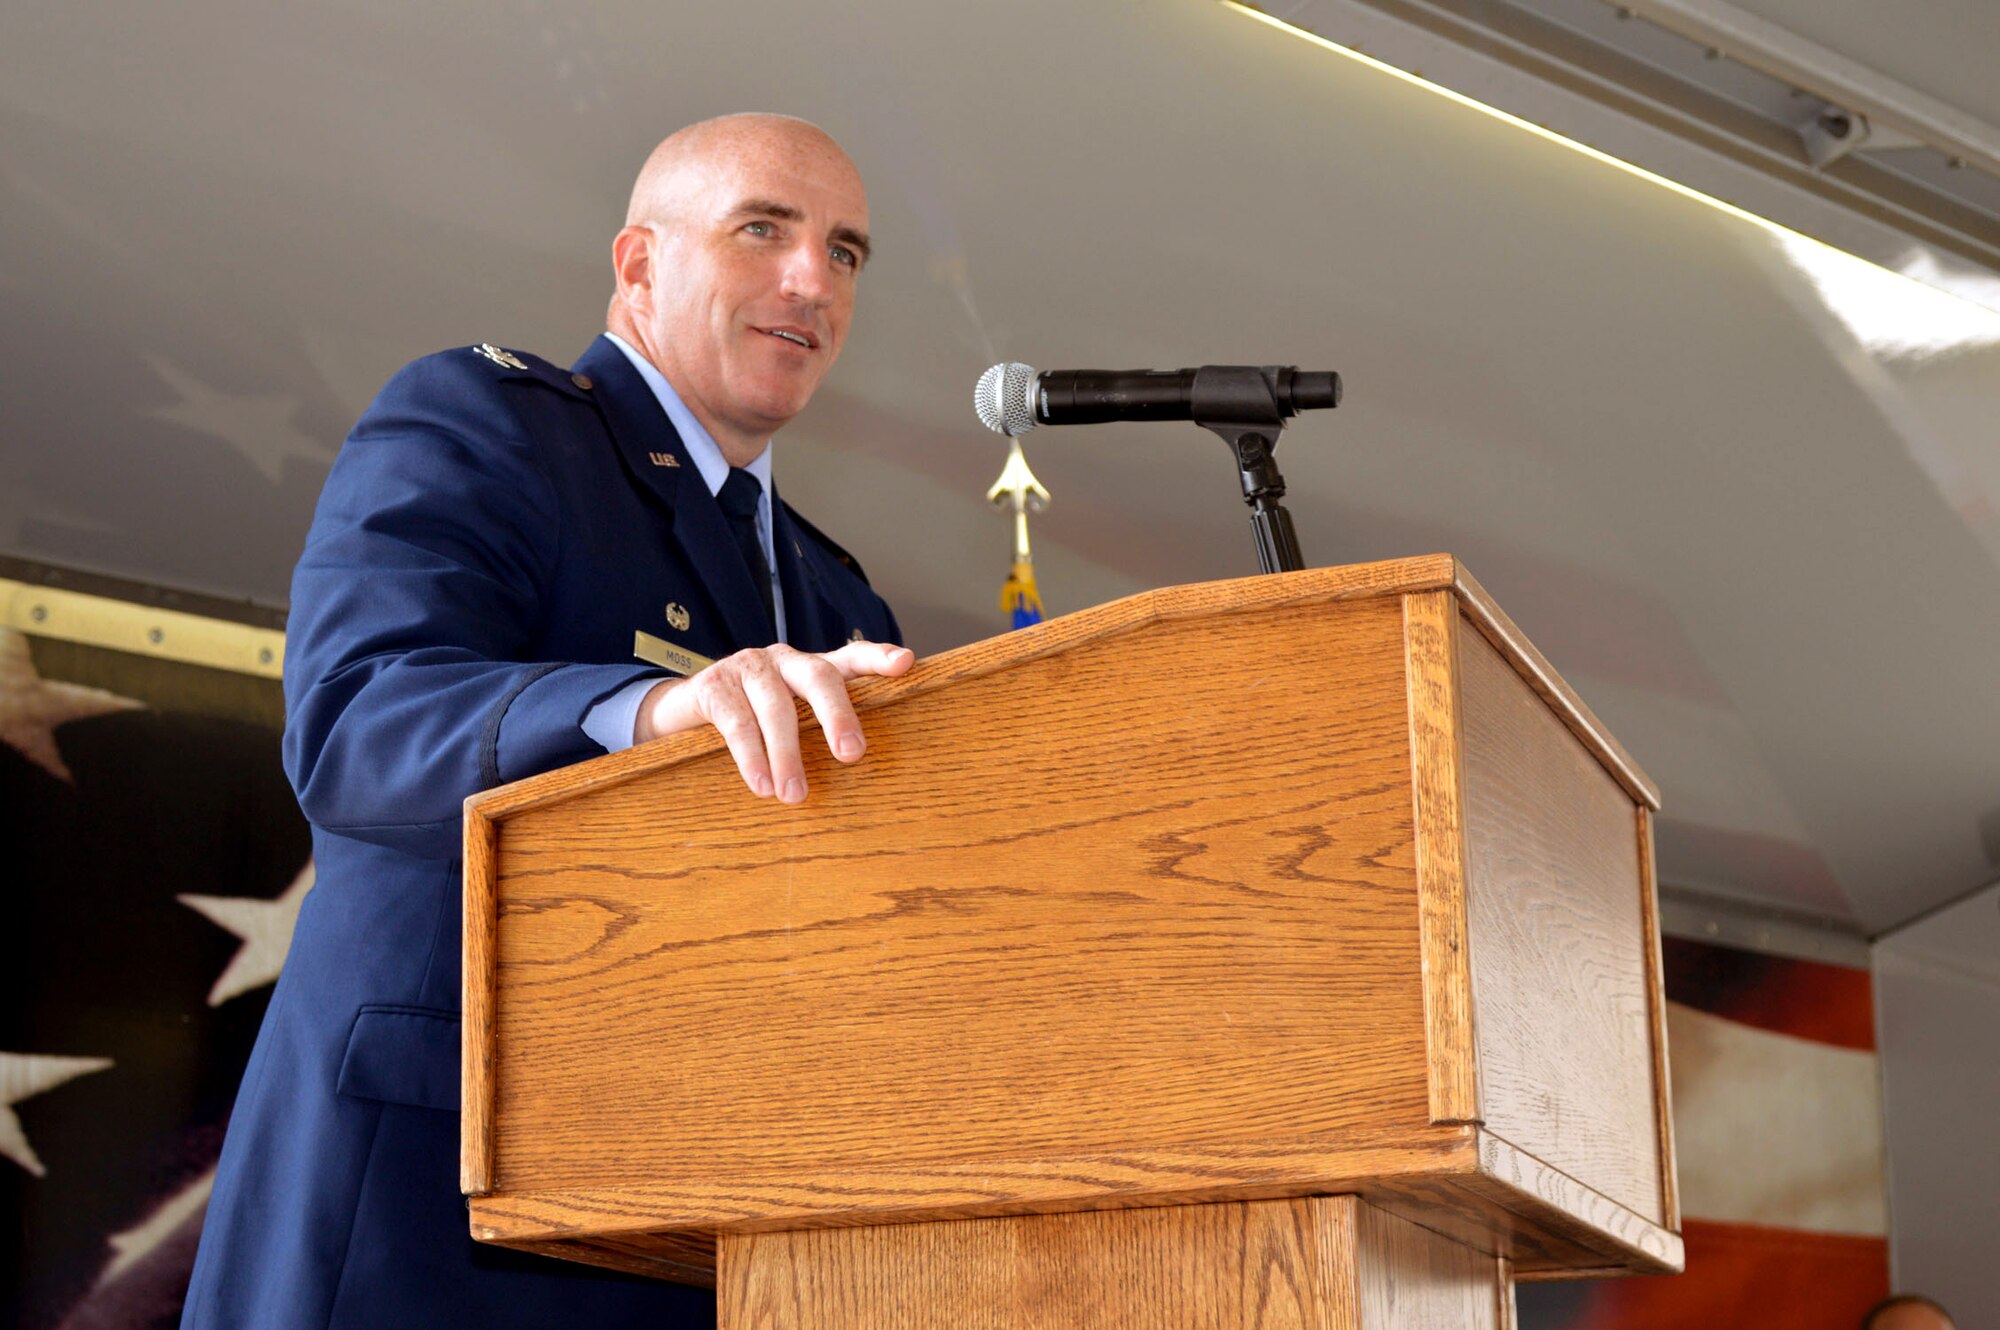 Col. Kenneth Moss, 43rd Airlift Group commander, addresses attendees during the 43rd Air Mobility Squadron activation ceremony July 1, 2015, at Pope Army Airfield, North Carolina. Aircraft maintenance and aerial port Airmen and functions transferred to the newly established 43rd AMS from the inactivated 3rd Aerial Port Squadron and the 43rd Aircraft Maintenance Squadron. (U.S. Air Force photo/Marvin Krause)